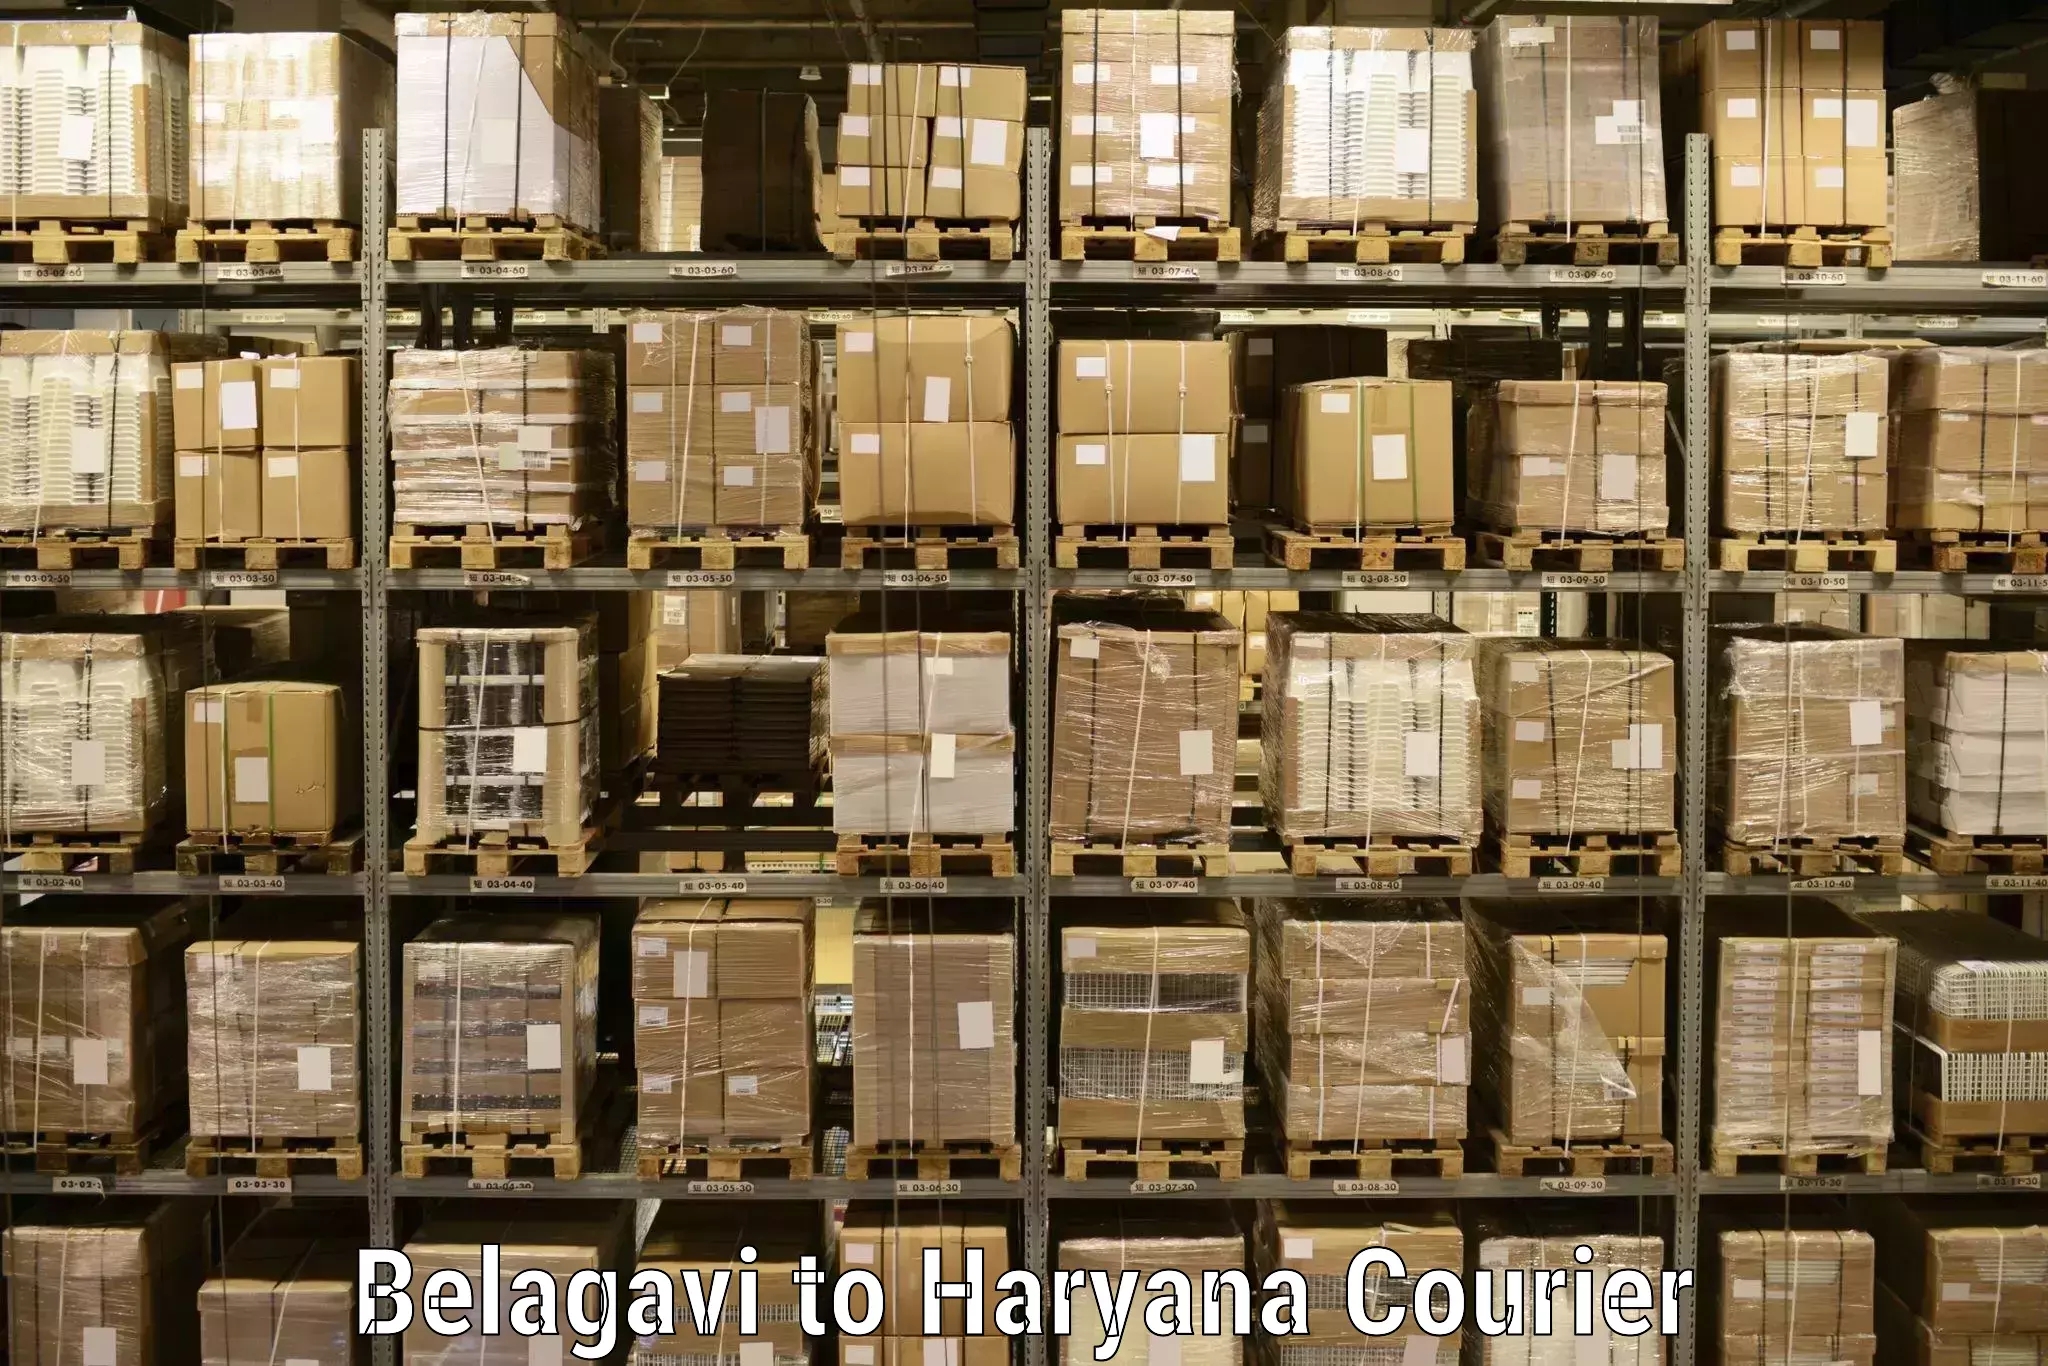 Advanced delivery solutions Belagavi to Gurgaon